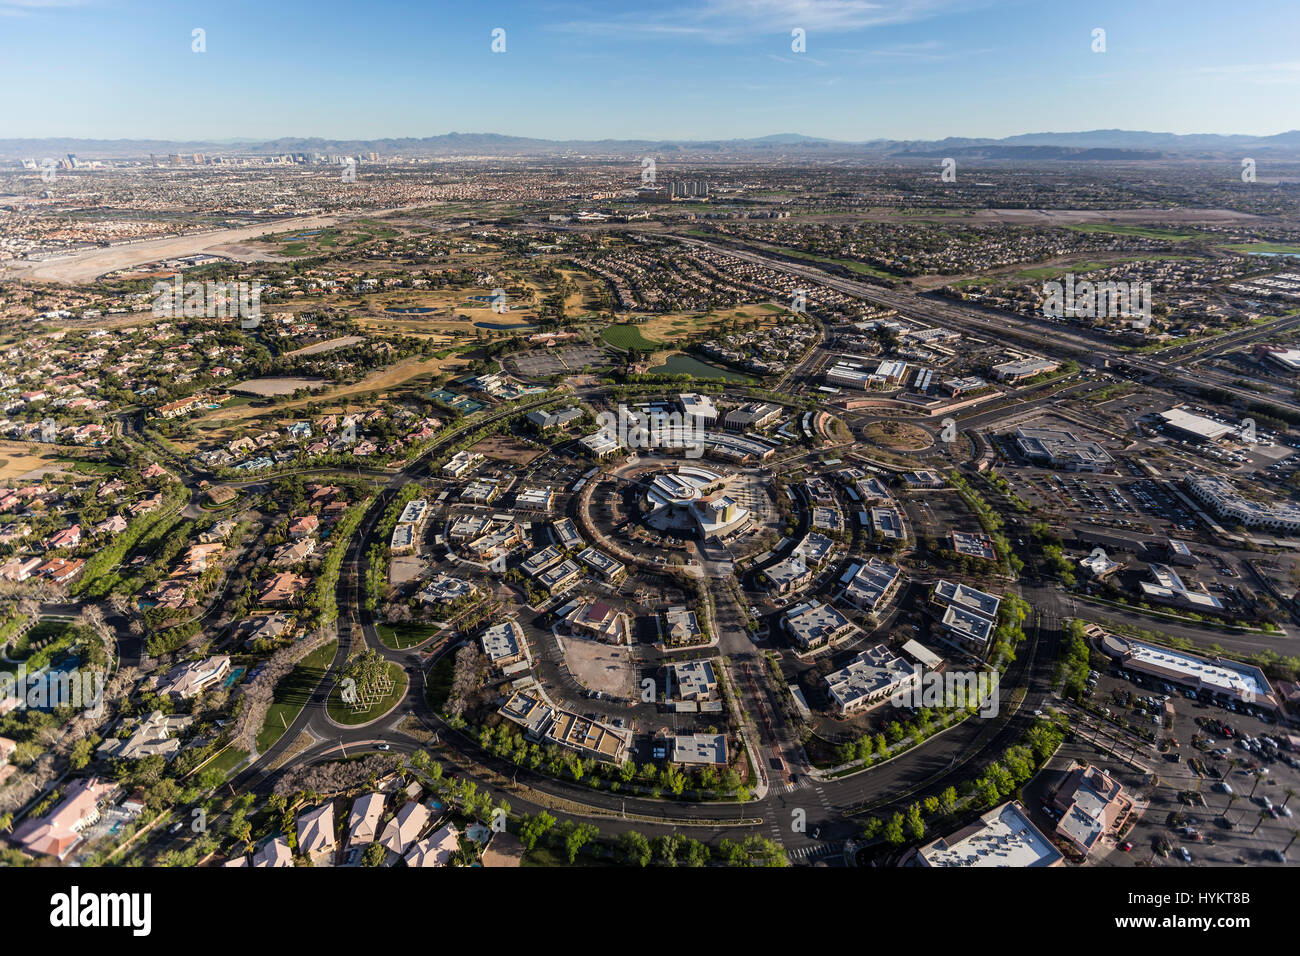 Aerial view of the Summerlin community in Las Vegas, Nevada. Stock Photo